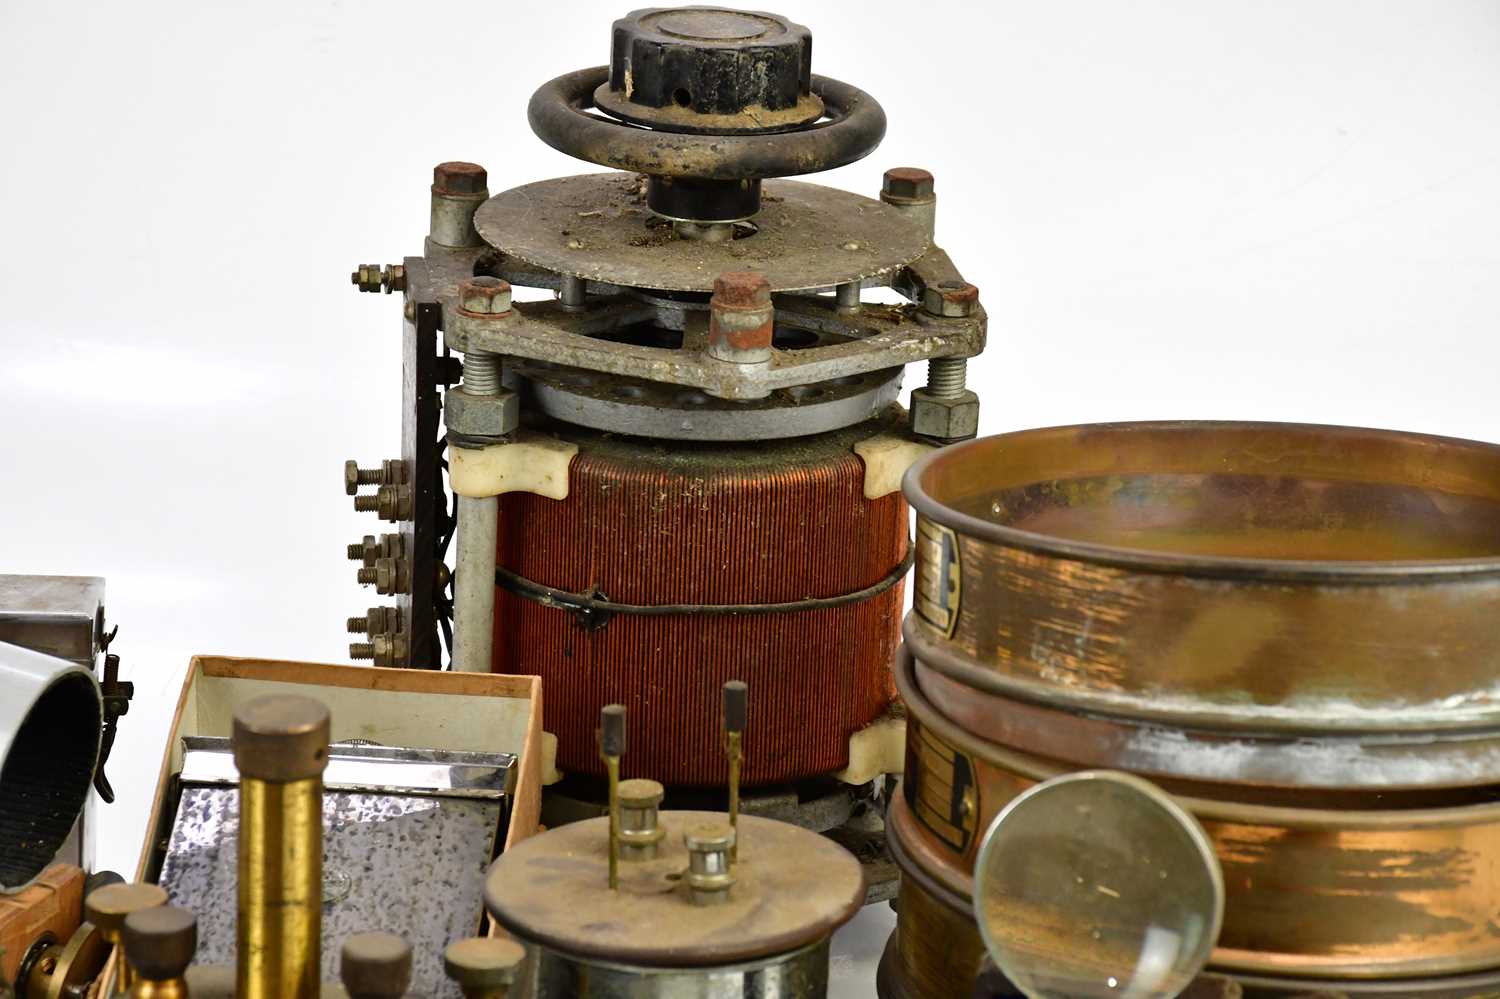 A Zenith Electric Co variable transformer, with an Endecotts Ltd laboratory test sieve set, a - Image 3 of 6